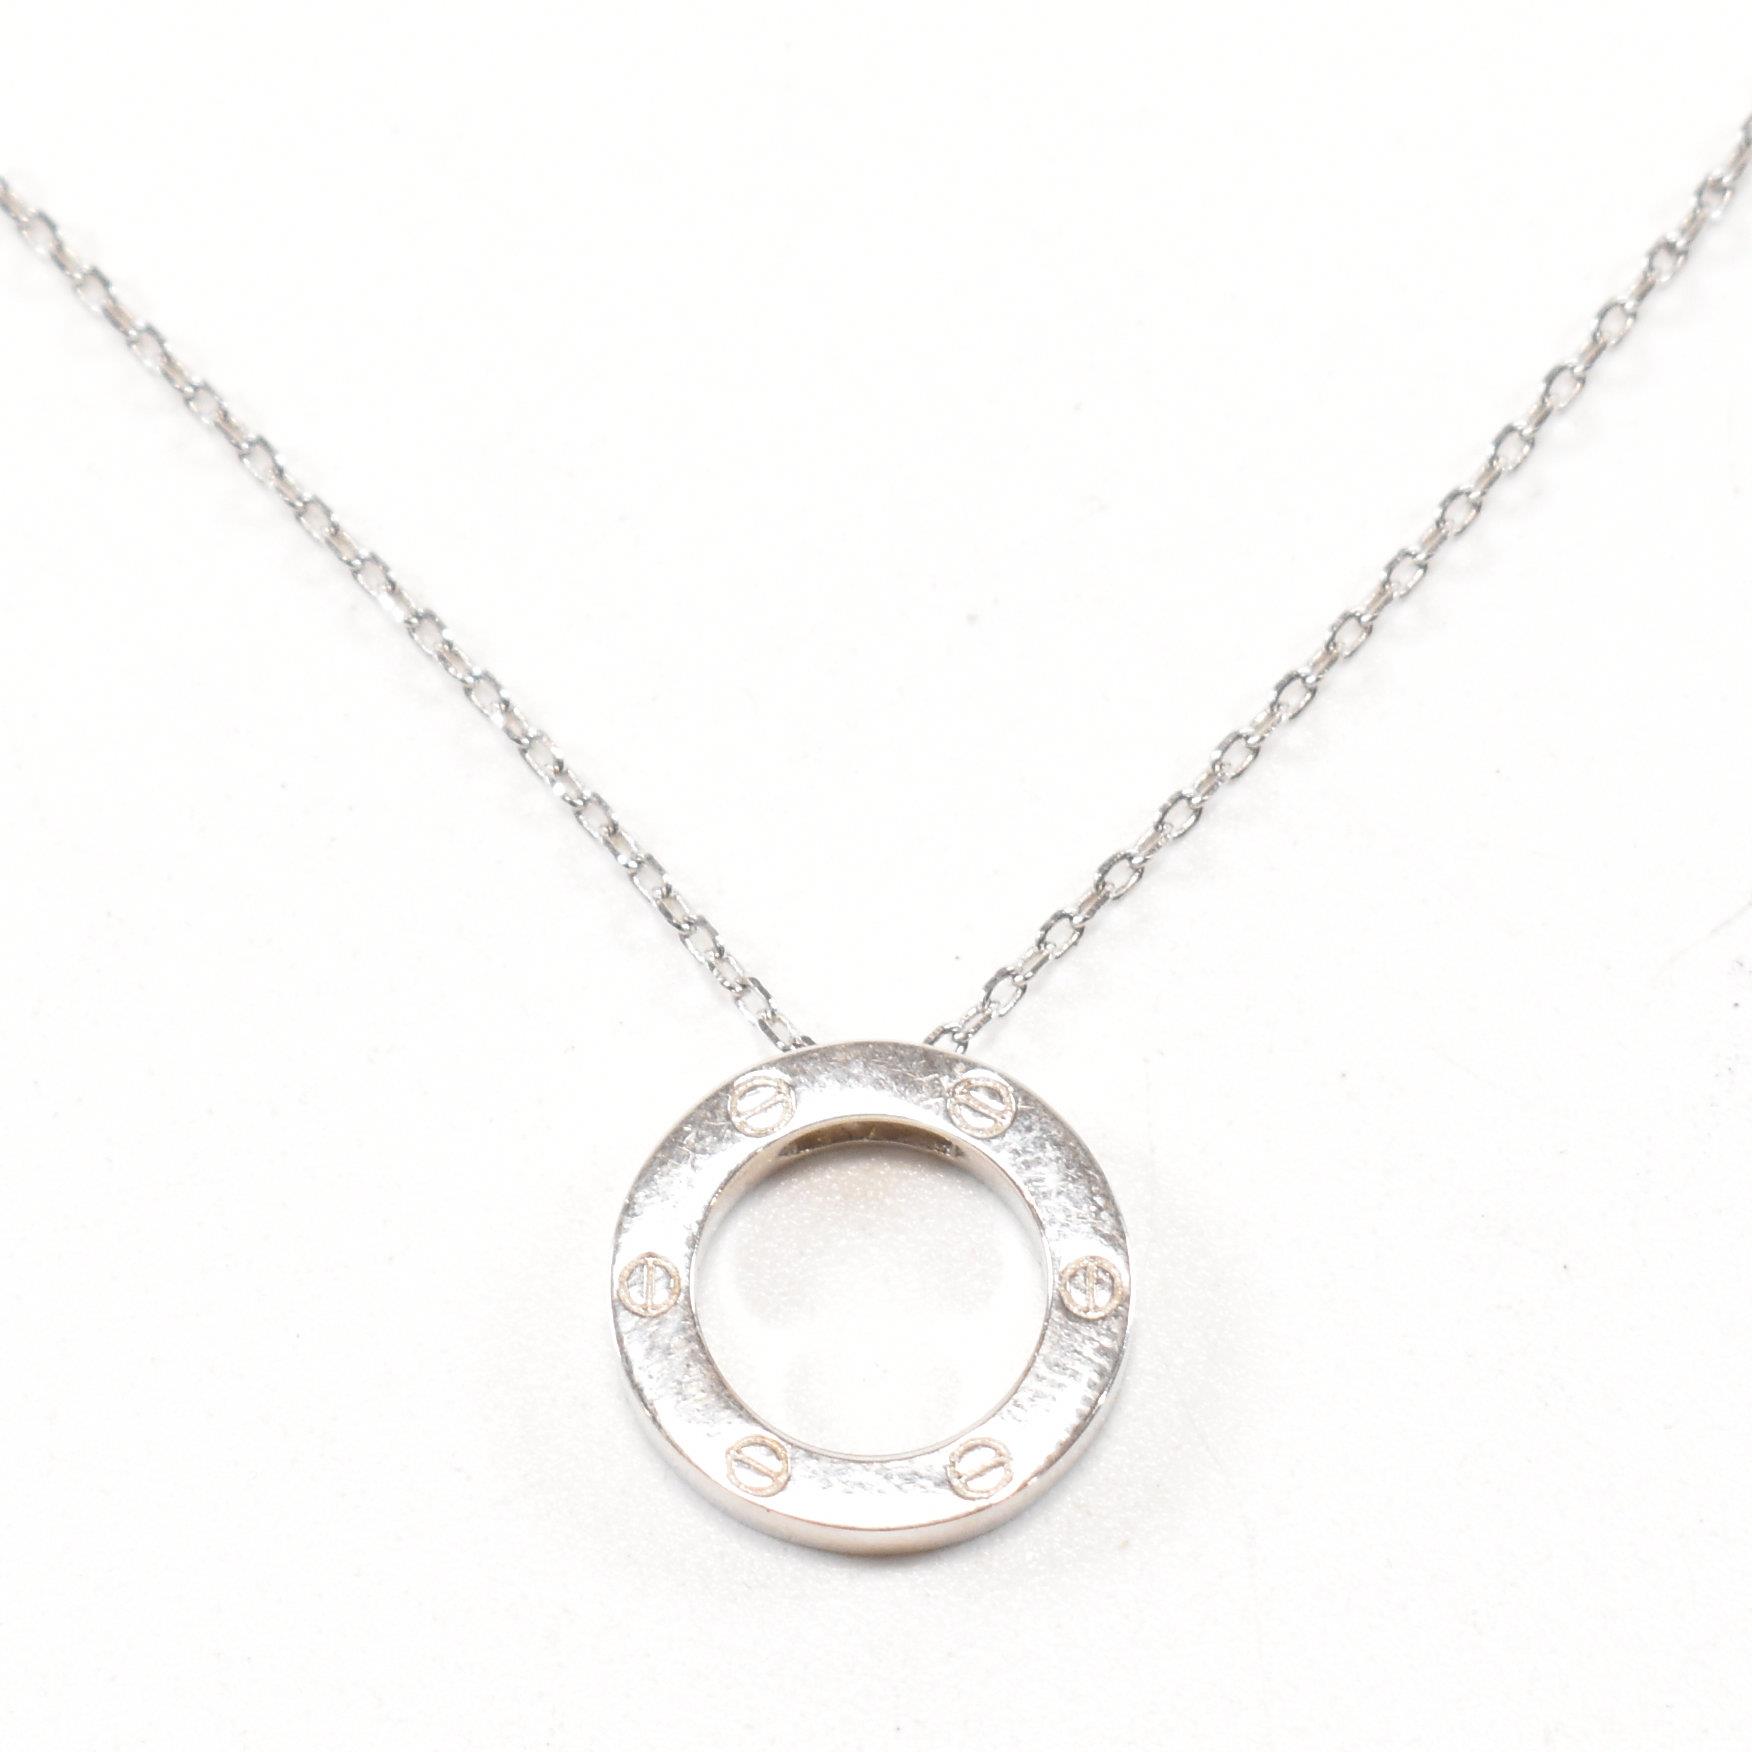 SILVER DESIGNER STYLE PENDANT NECKLACE - Image 2 of 7